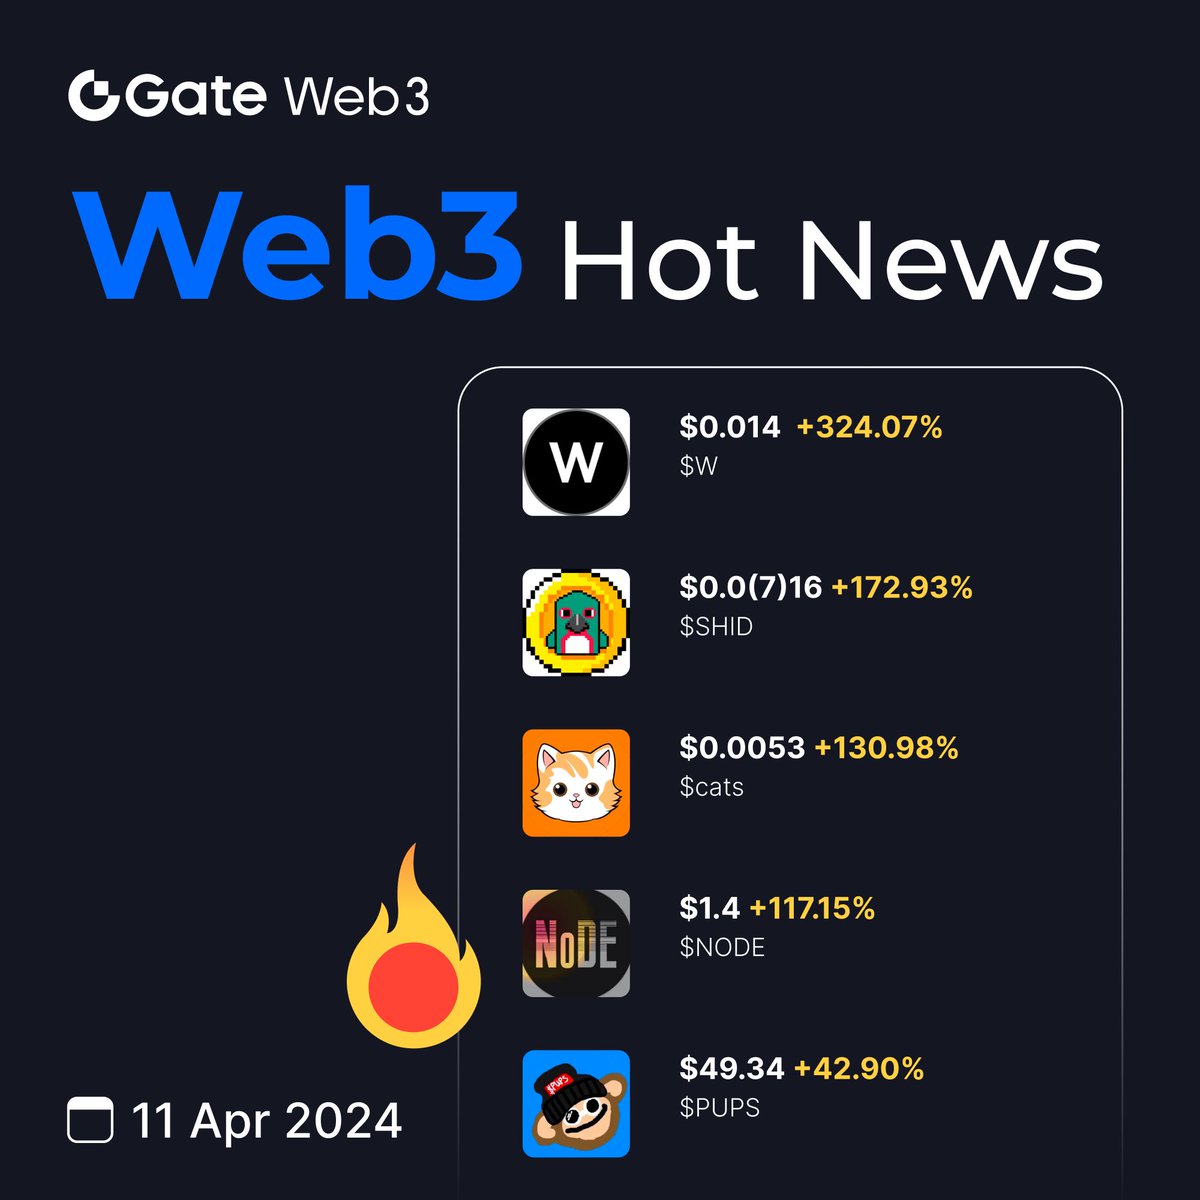 ⚡️Web3 Hot News Tracking🔫 🔥#BTC breaks through $70,000, driving #BRC20 tokens to rise📈 🚨Last 24H, $ORDI increased by 8%📈 😍 #BRC20 tokens $PUPS $W $NODE $cats $SHID have seen impressive growth💥 ❇️Store $BTC by #GateWeb3Wallet🚀:go.gate.io/w/fJbgNWU2 #GateWeb3